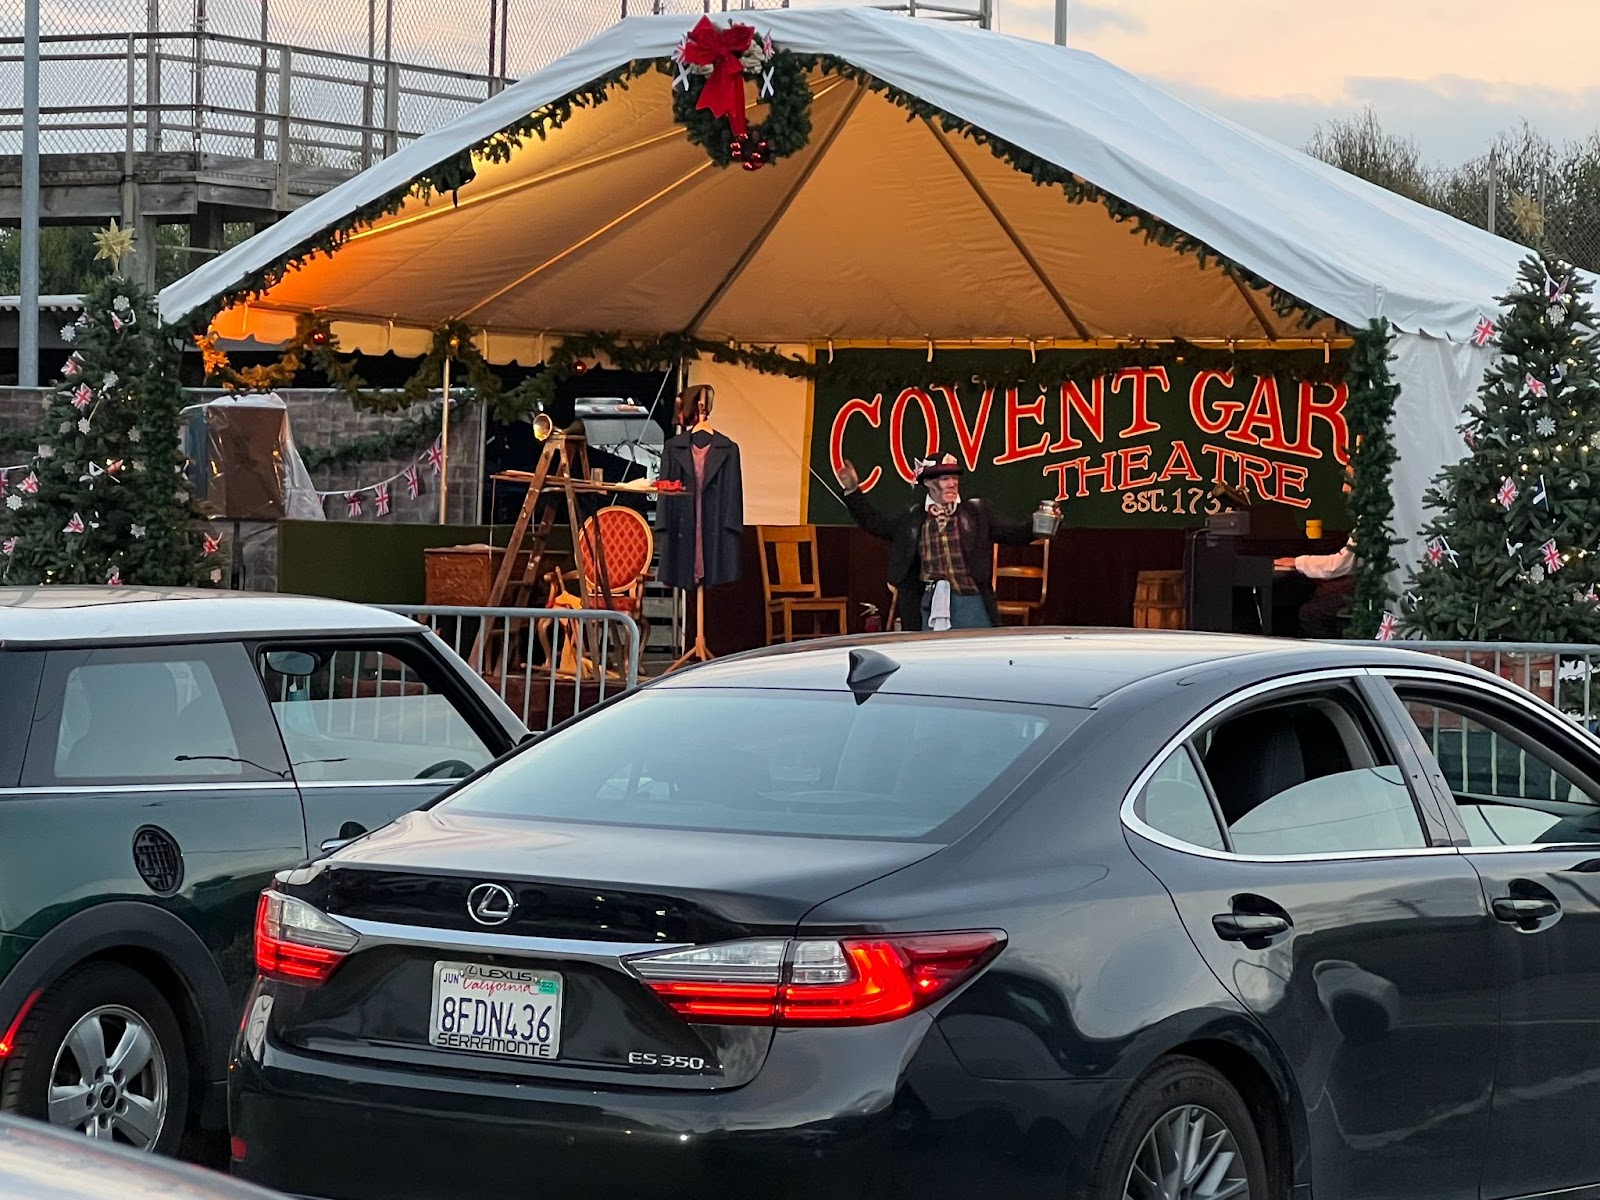 Cars sit parked in front of a stage that displays part of a sign that reads "Covent Garden Theatre."